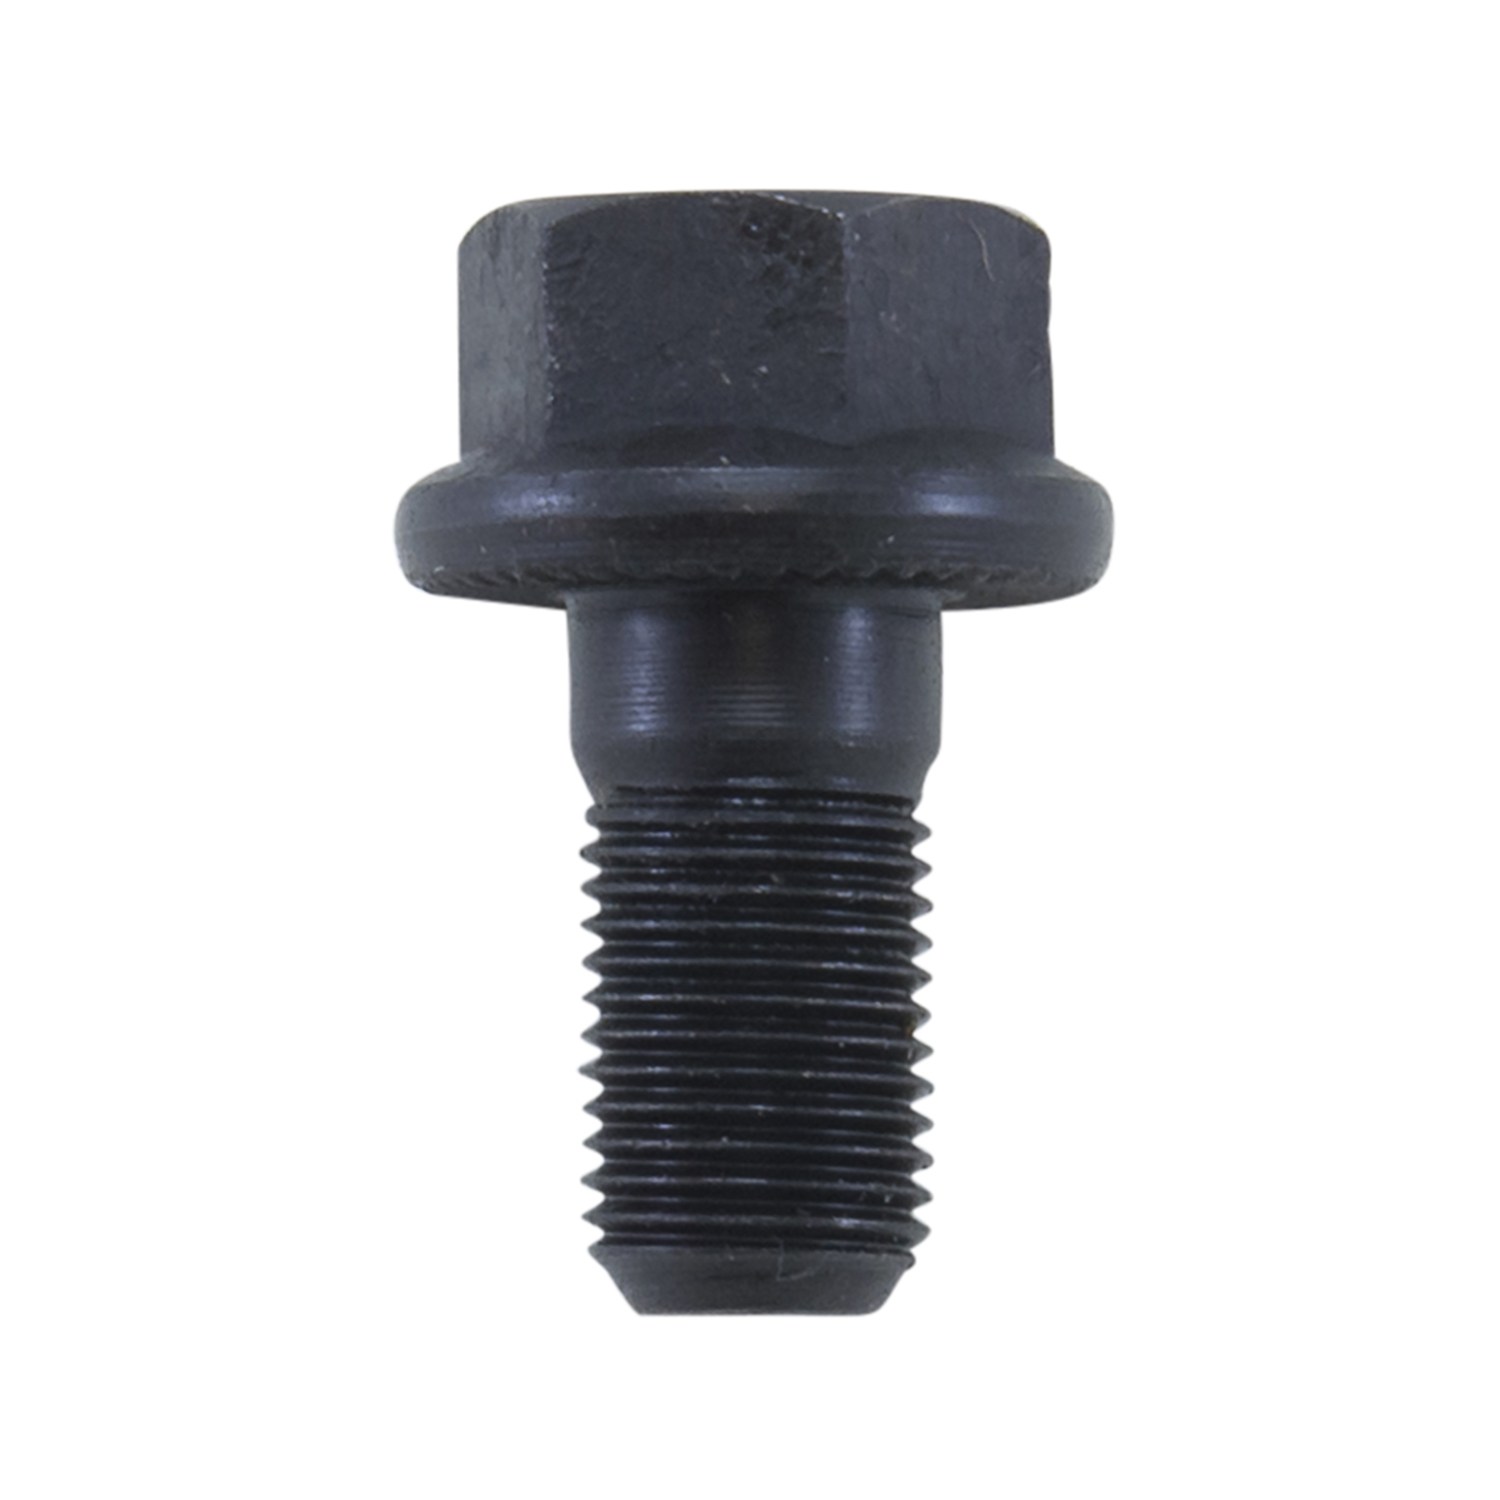 Replacement Ring Gear Bolt For Dana 44 Jk Rubicon Front.